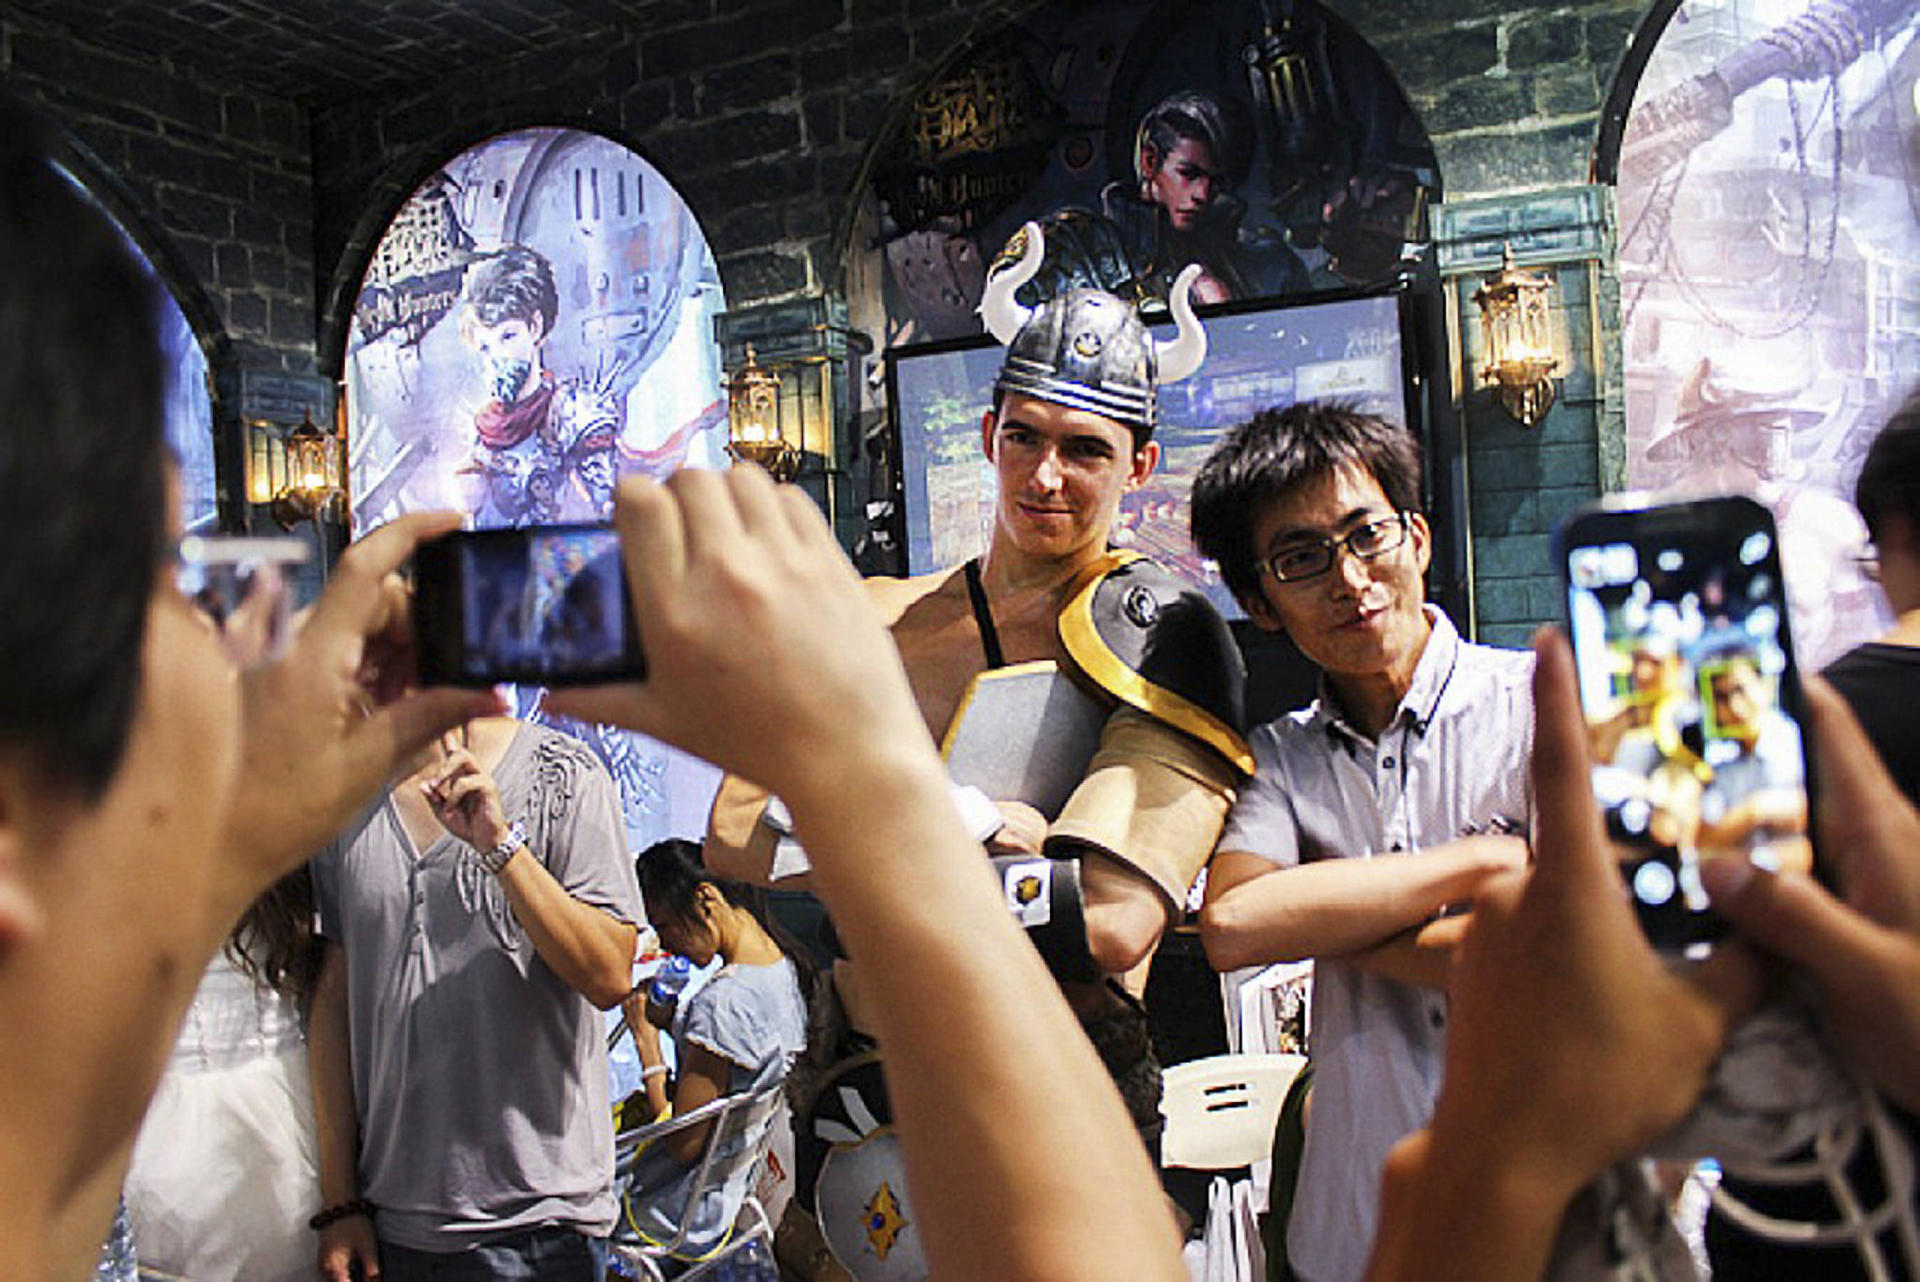 Gaming fans pose for photos at a convention in Shanghai. China is set to overtake the US as the world's biggest mobile gaming market next year, according to an industry forecast. Photo: SCMP Pictures